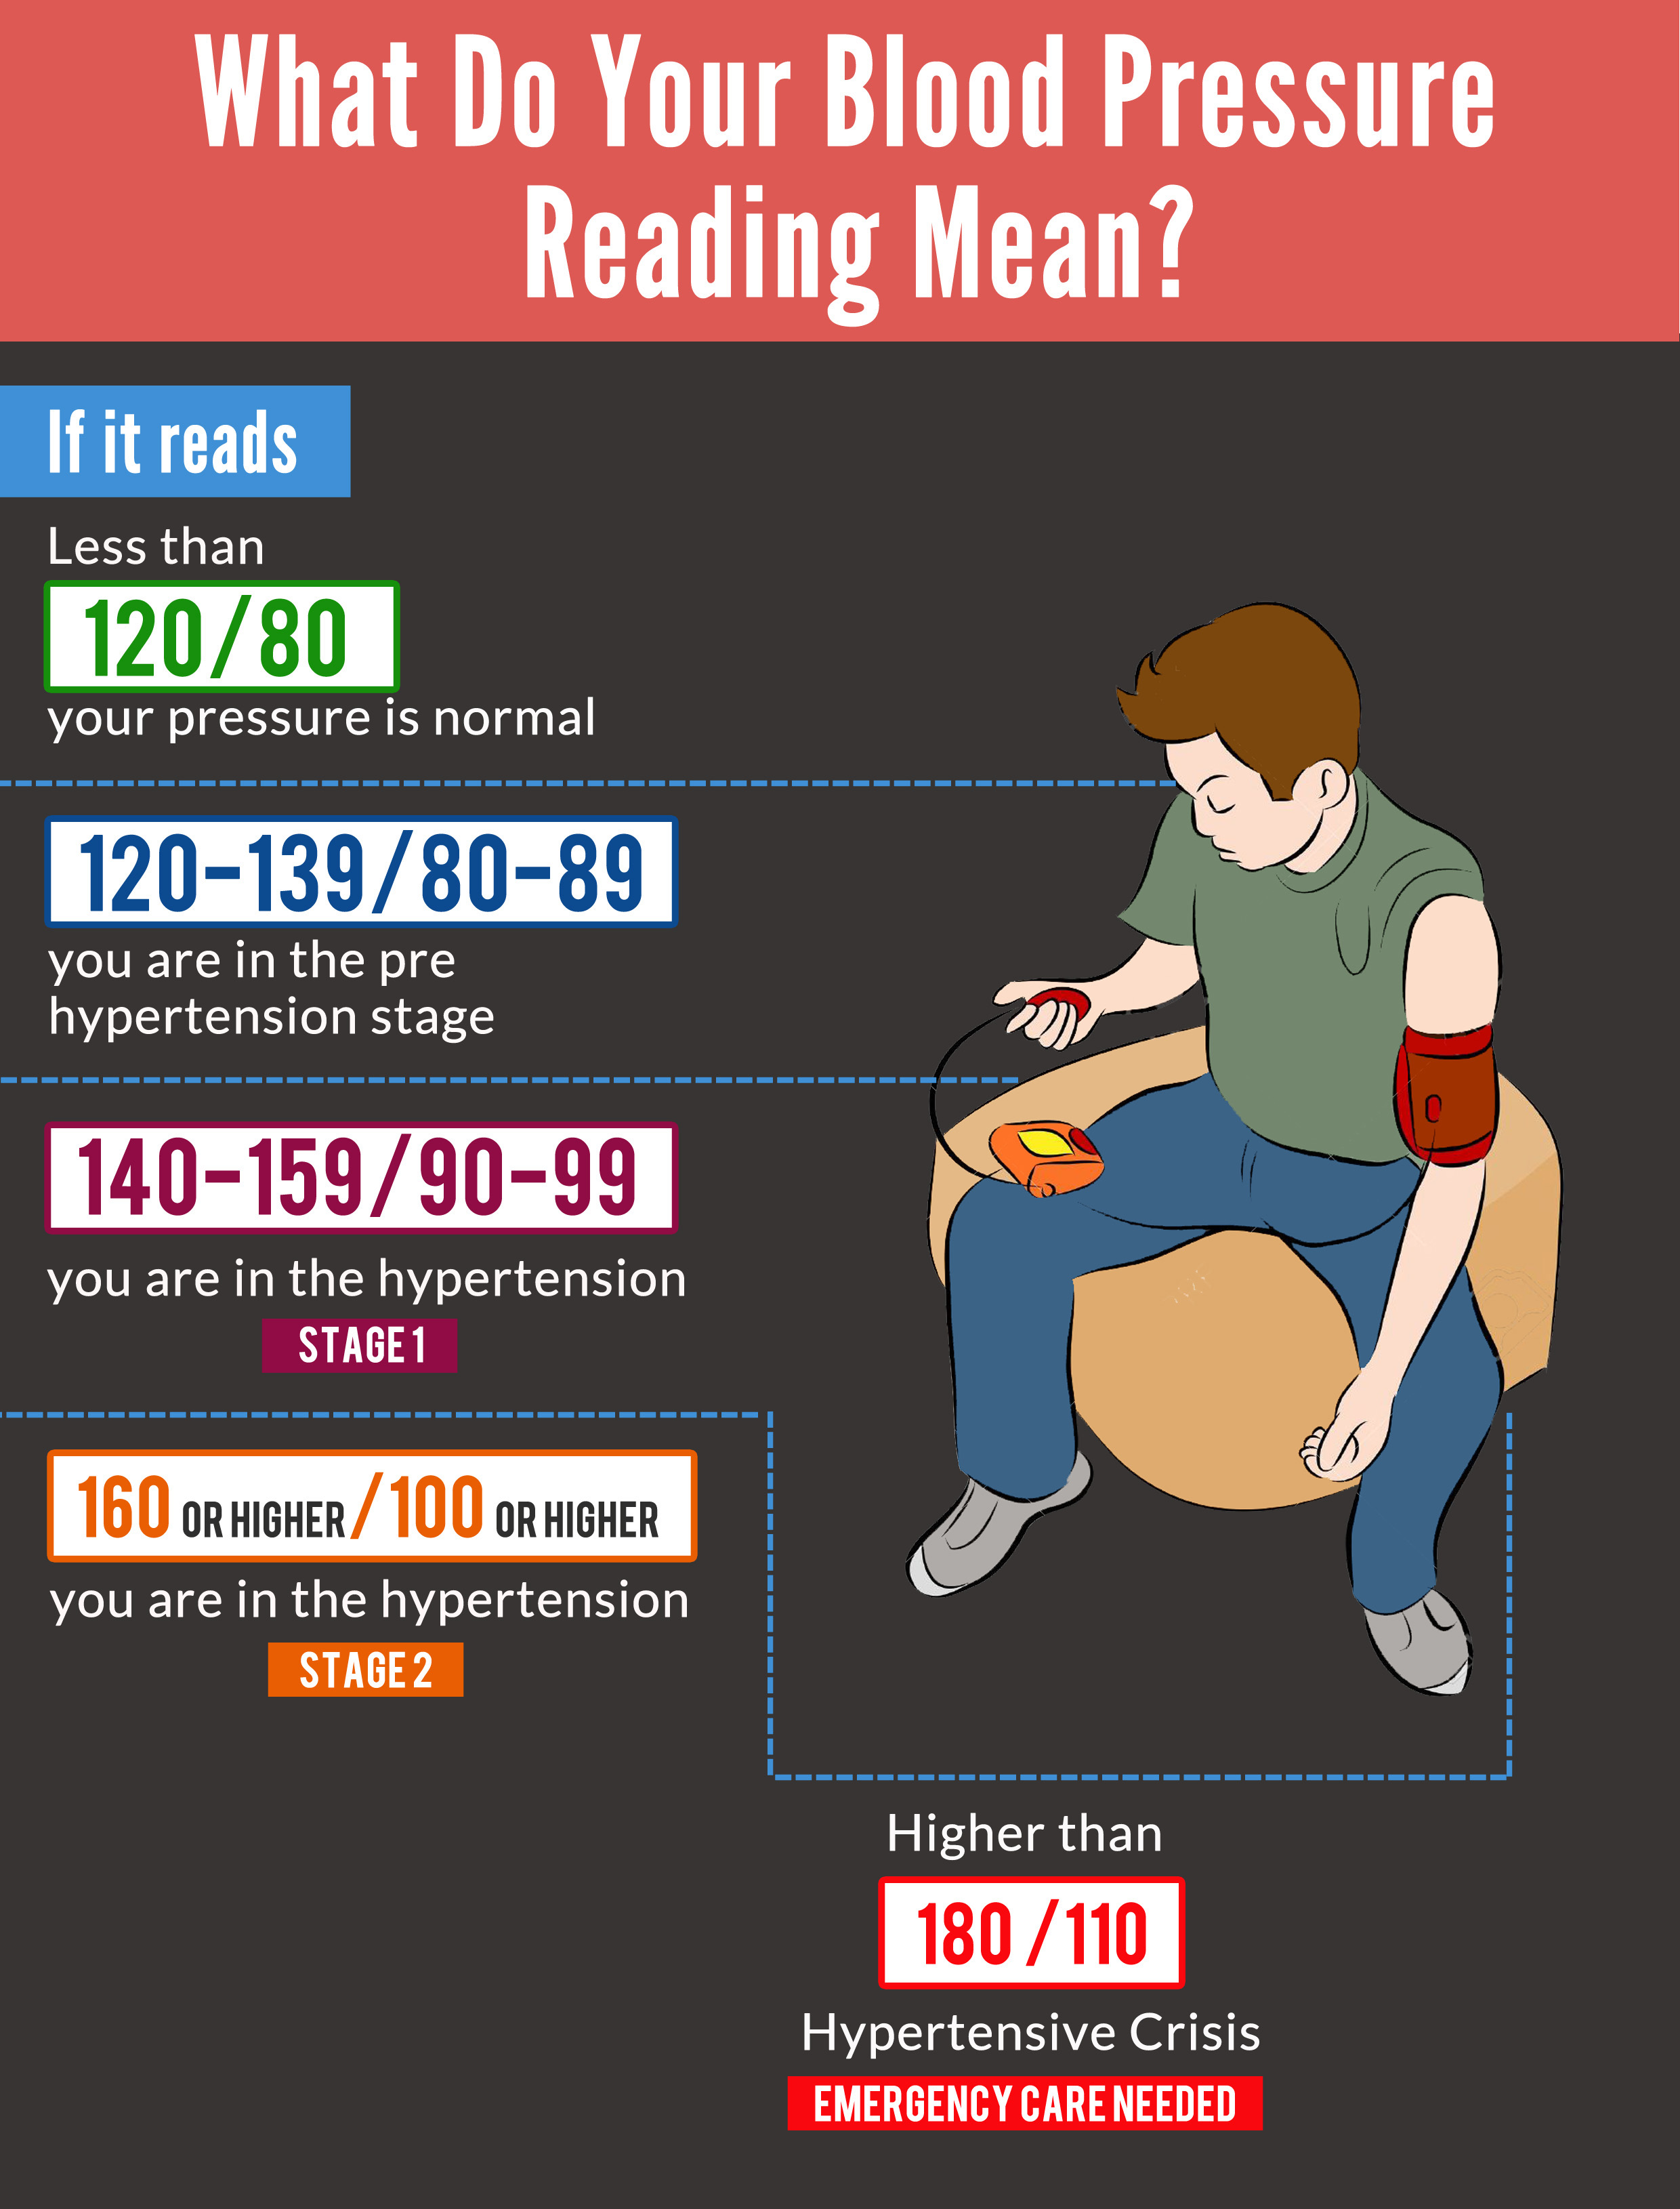 Blood pressure reading infographics you can download.